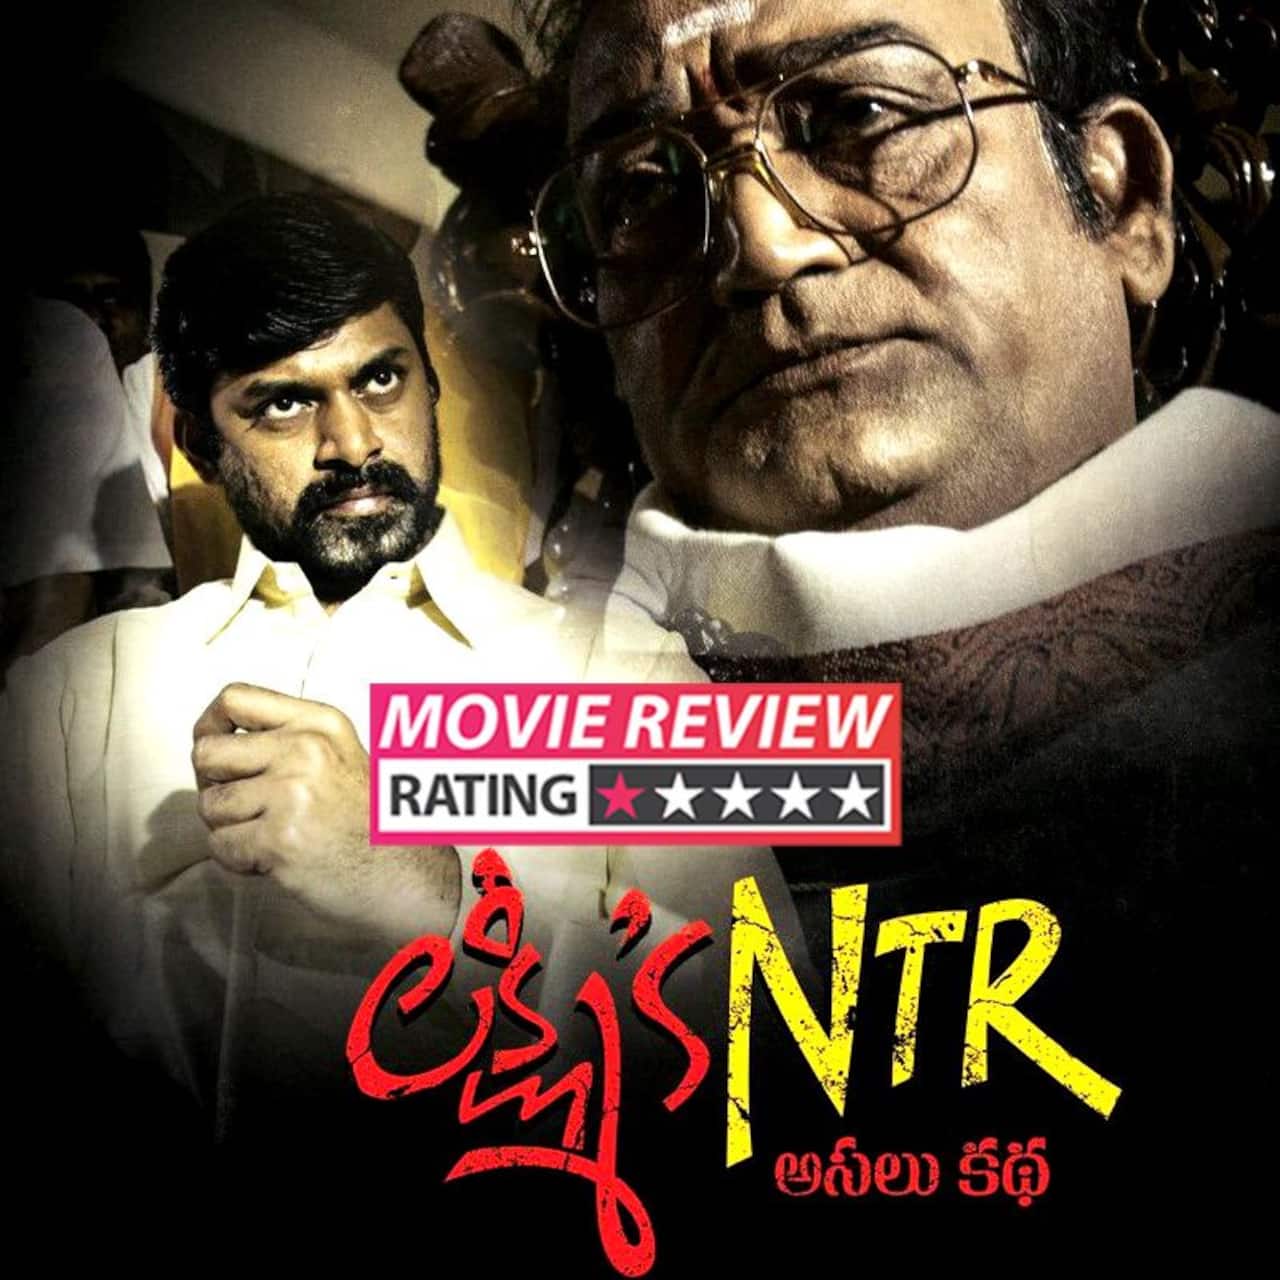 Lakshmi's NTR Movie Review: It's a wild goose chase with a classic Ram Gopal Varma touch